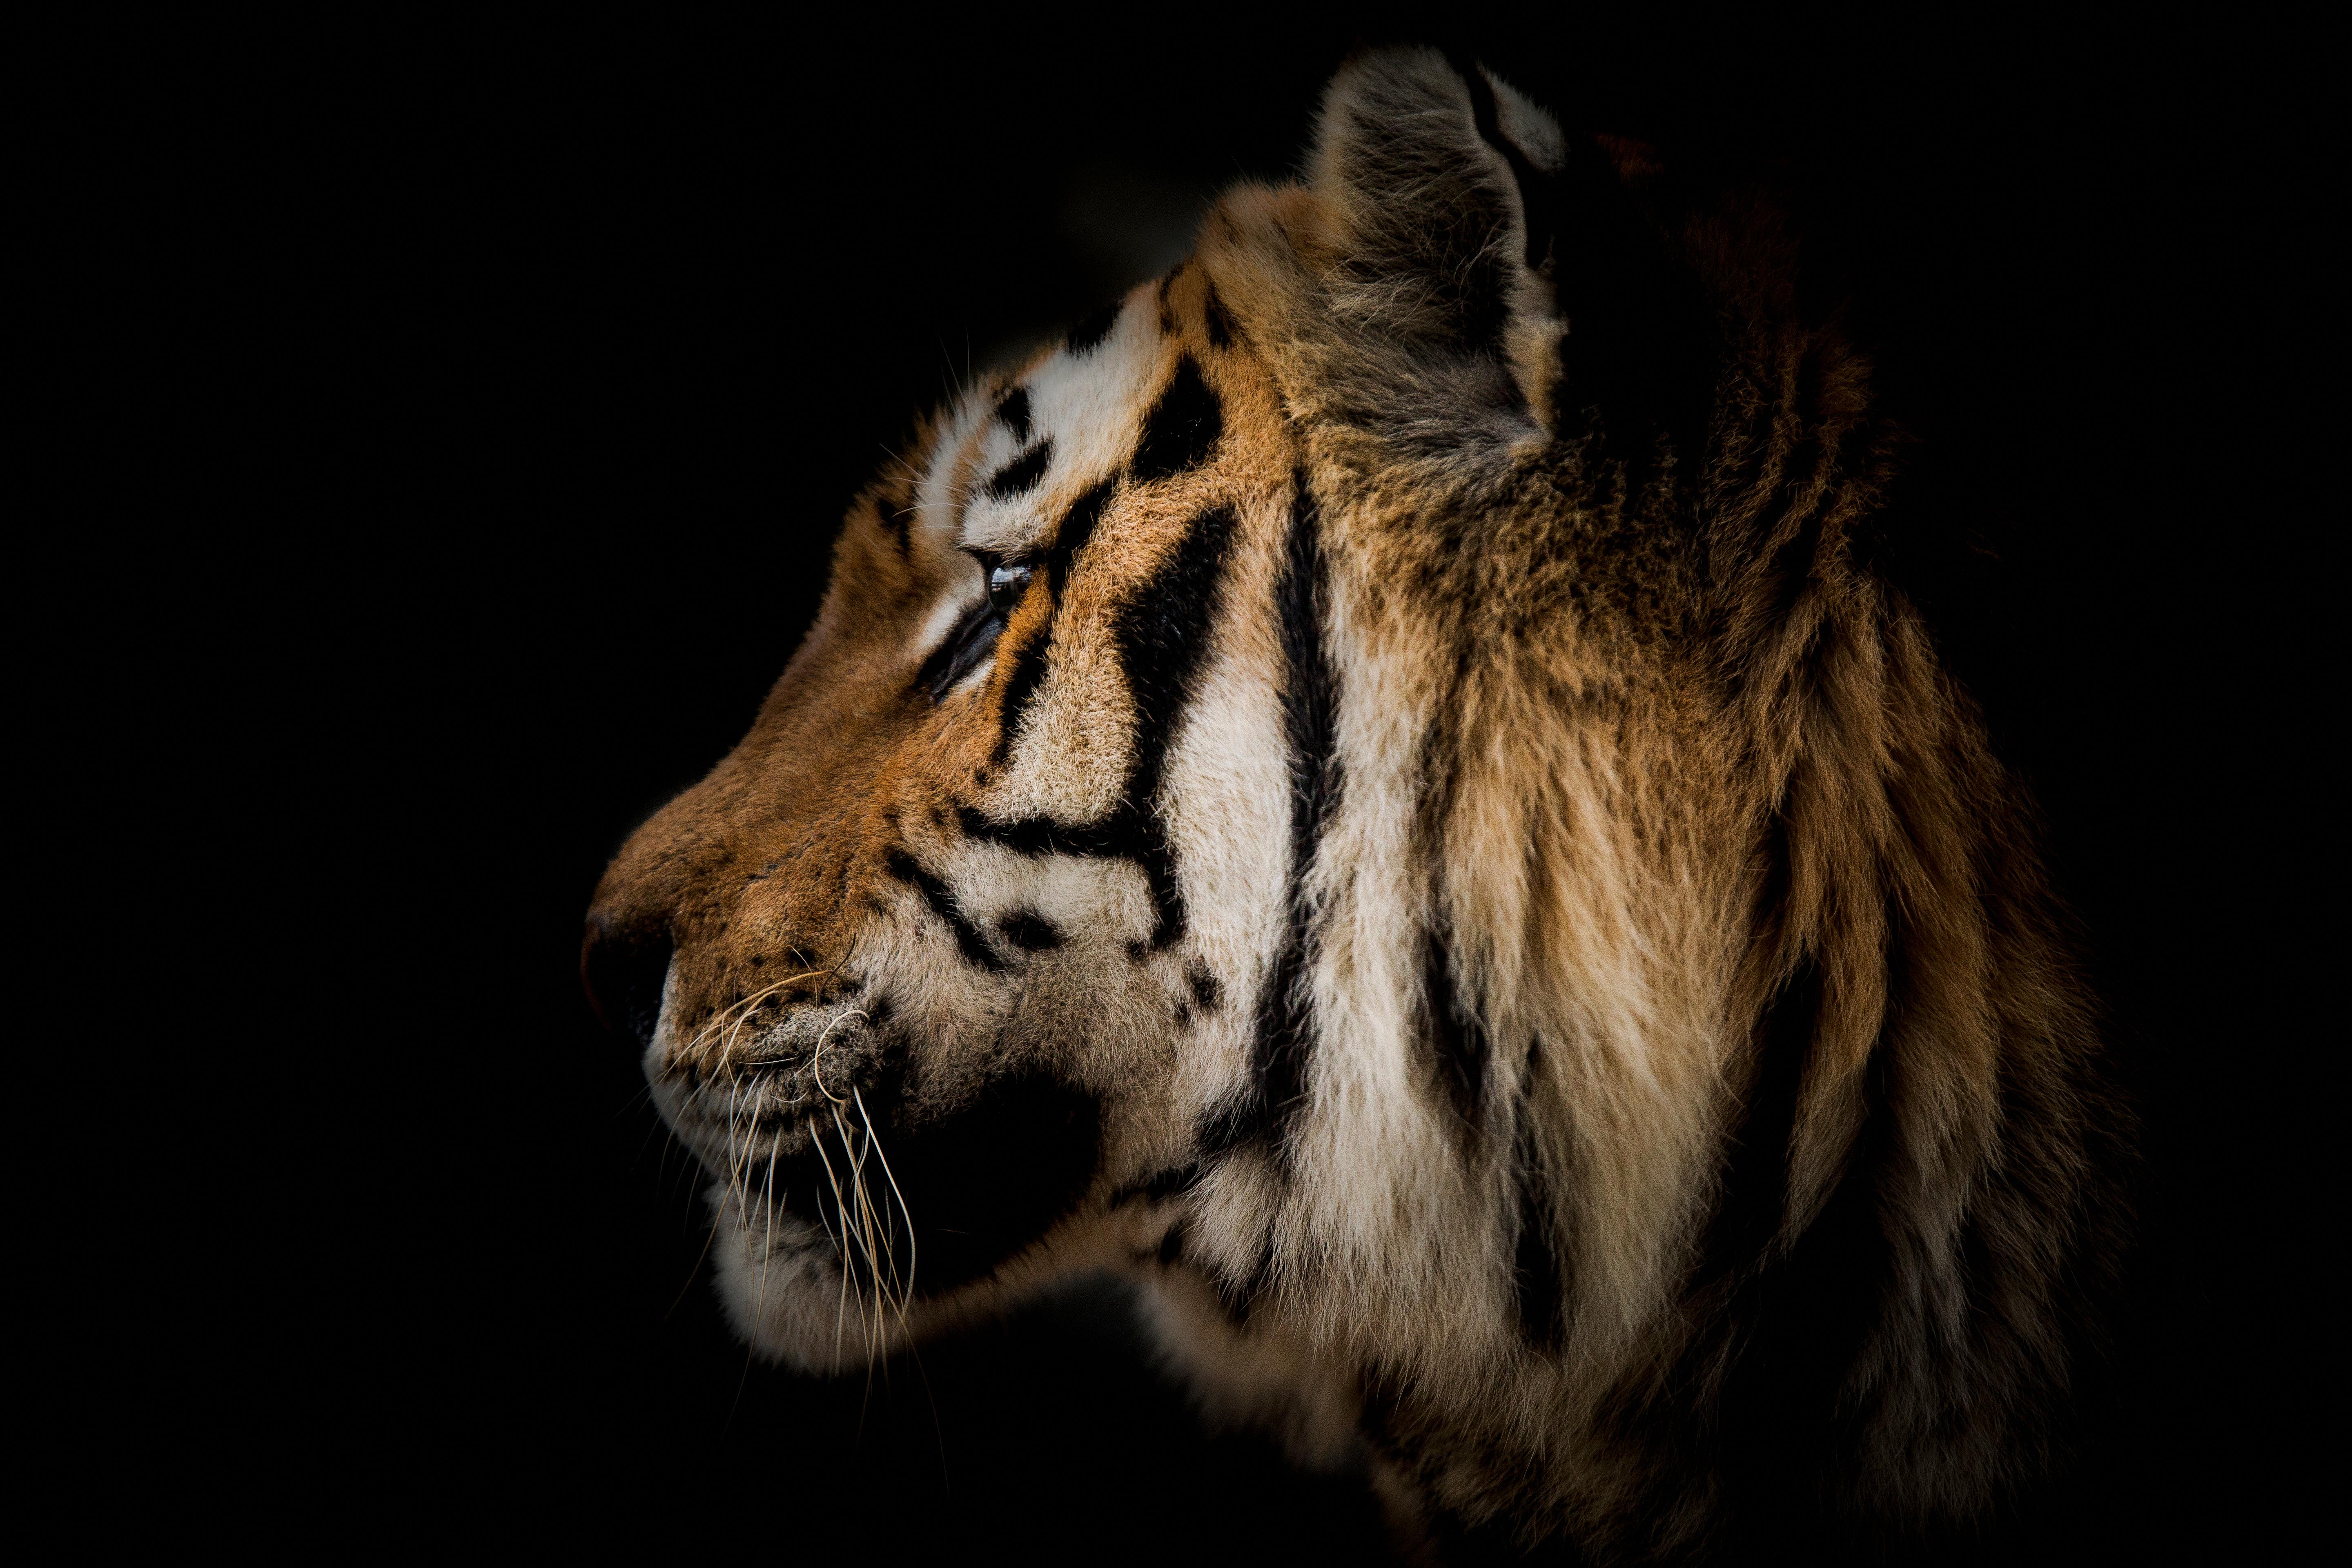 This is a contemporary photograph of a Tiger by Shane Russeck. 
60x40 Edition of 10
Printed on archival paper using archival inks
Singed and numbered  by Shane

Shane Russeck is a modern day photographer, adventurer, and explorer. He first picked up